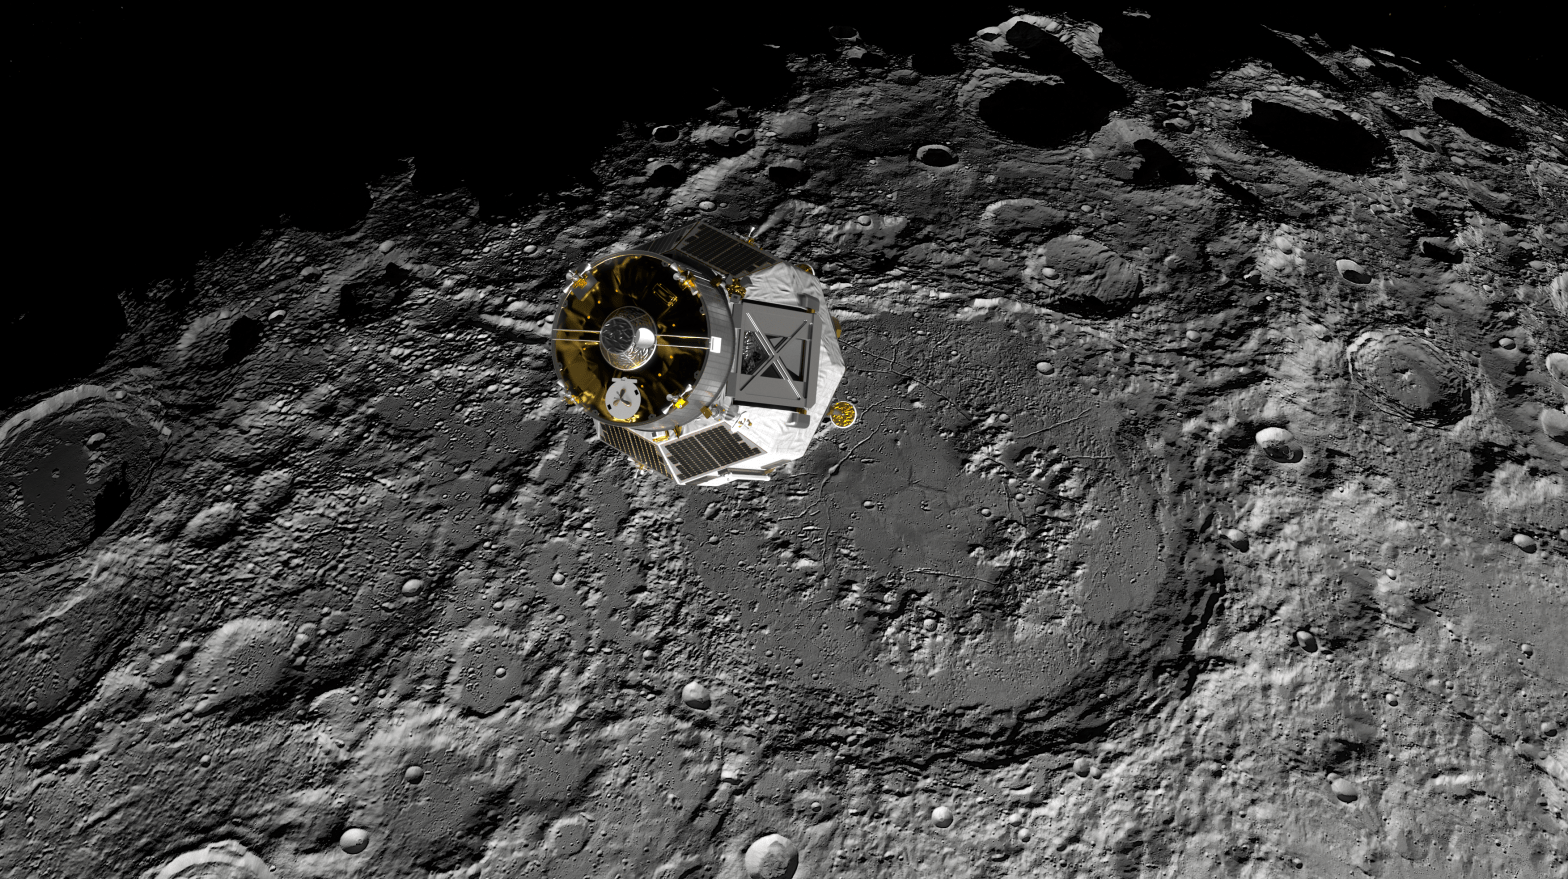 A mock-up of the Heracles lunar lander, slated to head to the moon in the late 2020s. (Illustration: ESA/ATG Medialab)